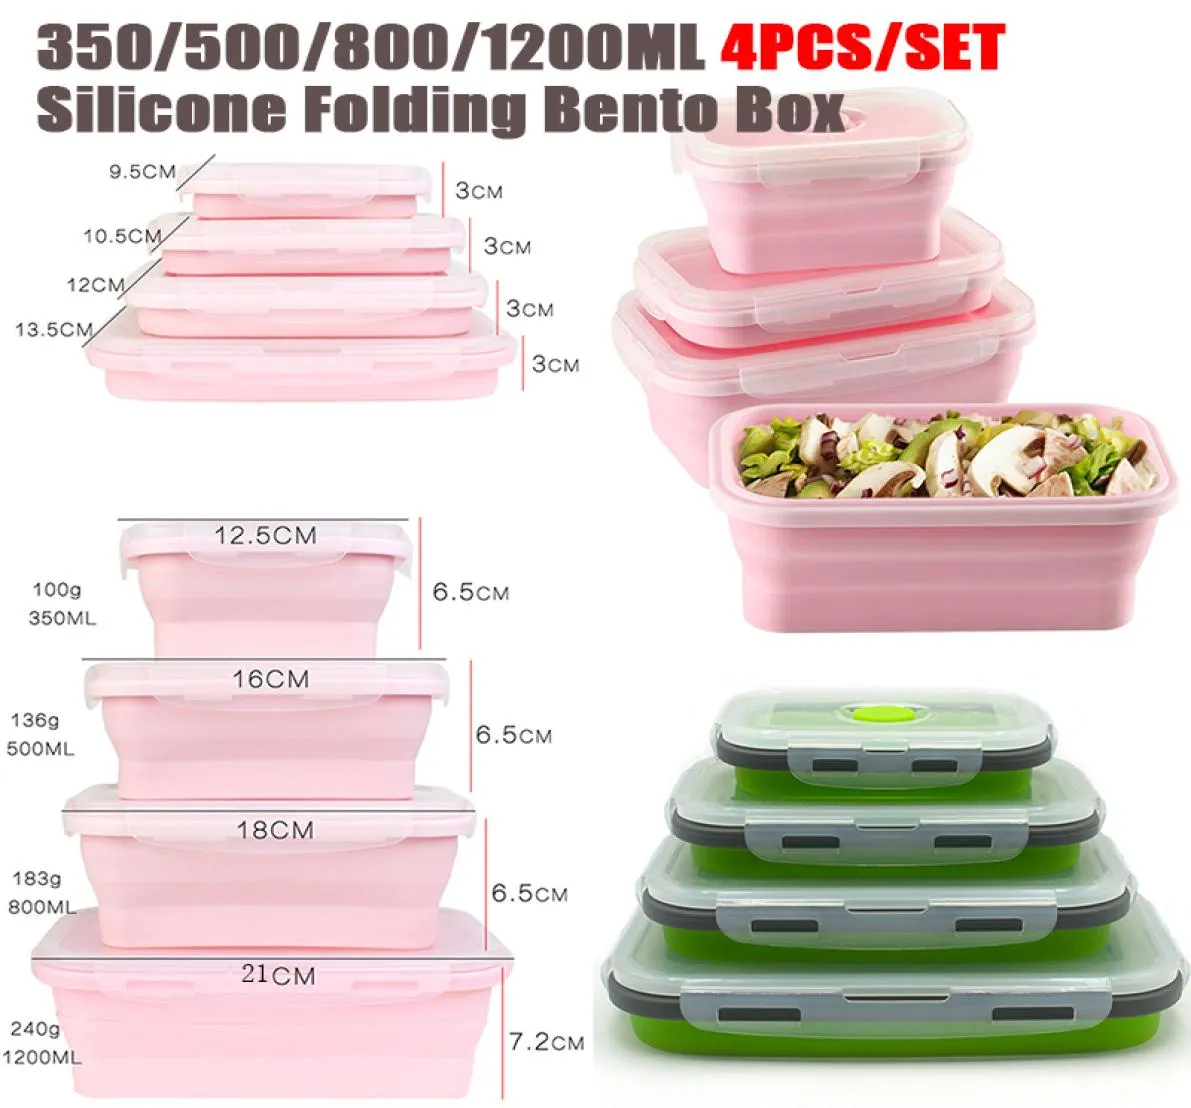 BENTO BOXES 4PCSSESS SILICONE RESTANGLE LUNGHTIBLE FOOLLAPERAY FOOD CONTALER BOWH 3005008001200ML للقرص 2210228357170